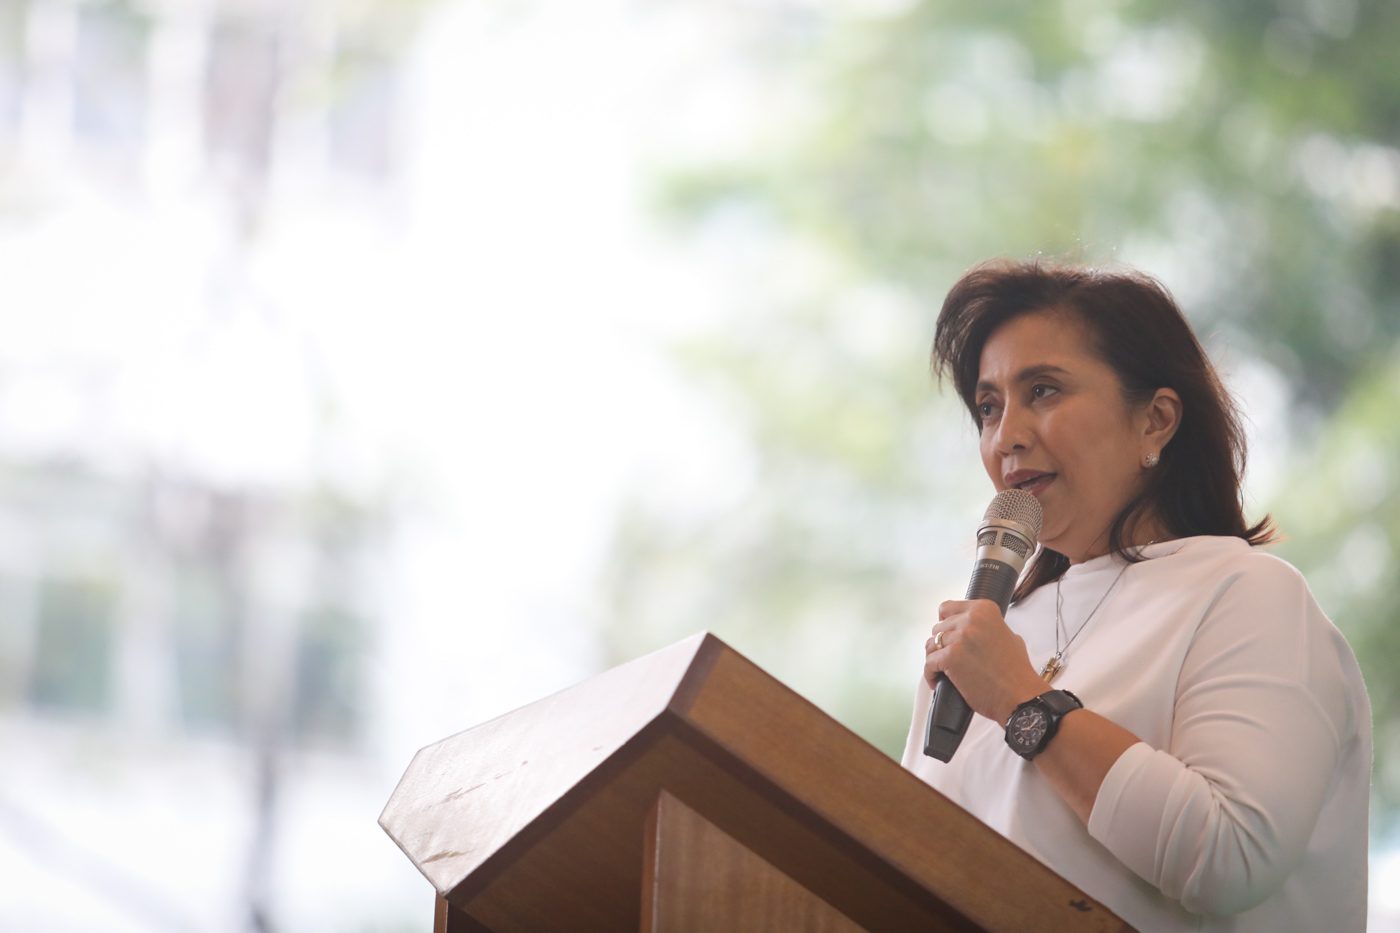 Linking opposition to Red October plot ‘politicizes the AFP’ – Robredo